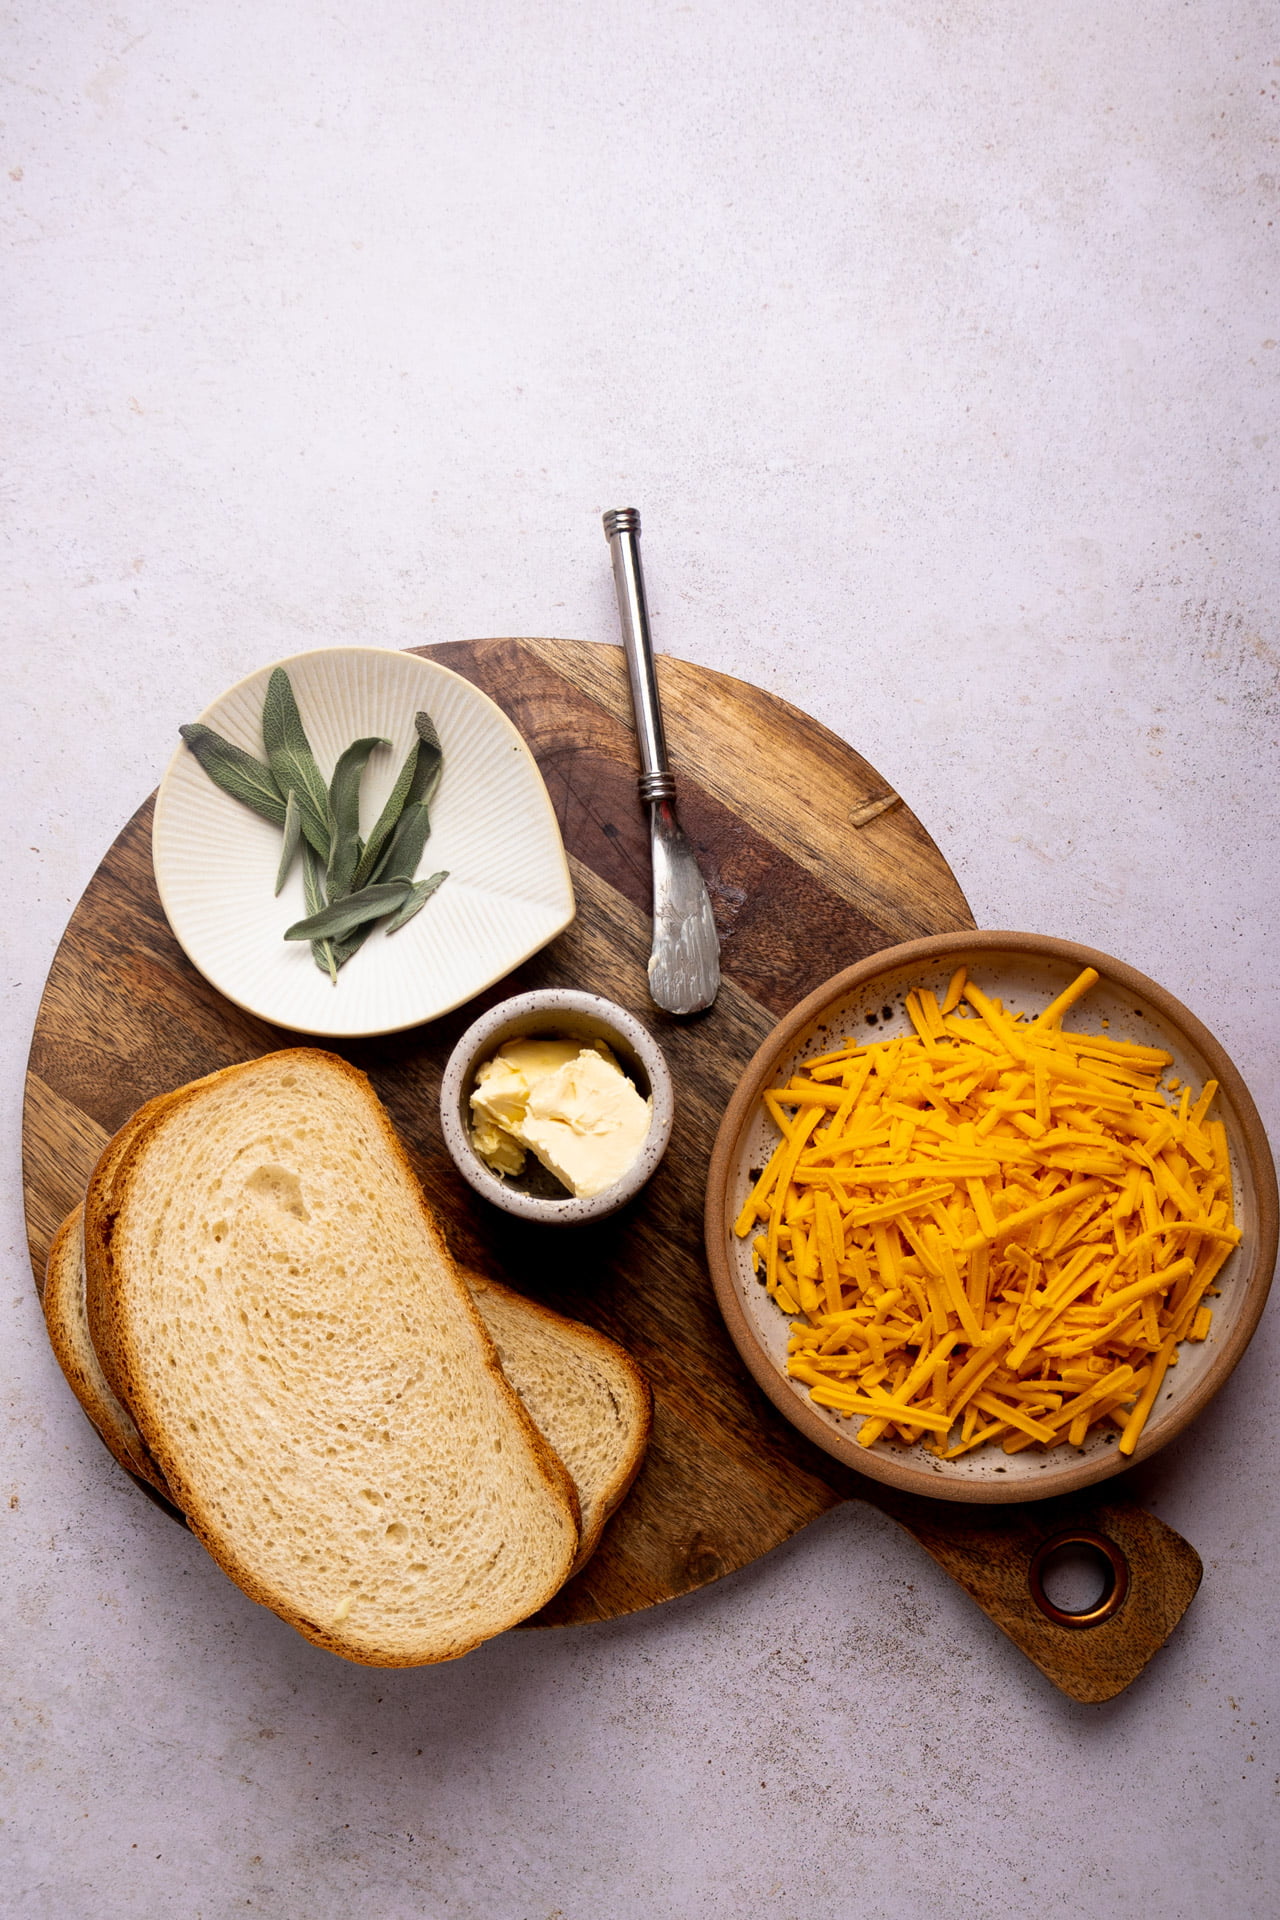 shredded cheddar, slices of bread and sage leaves on a round cutting board.